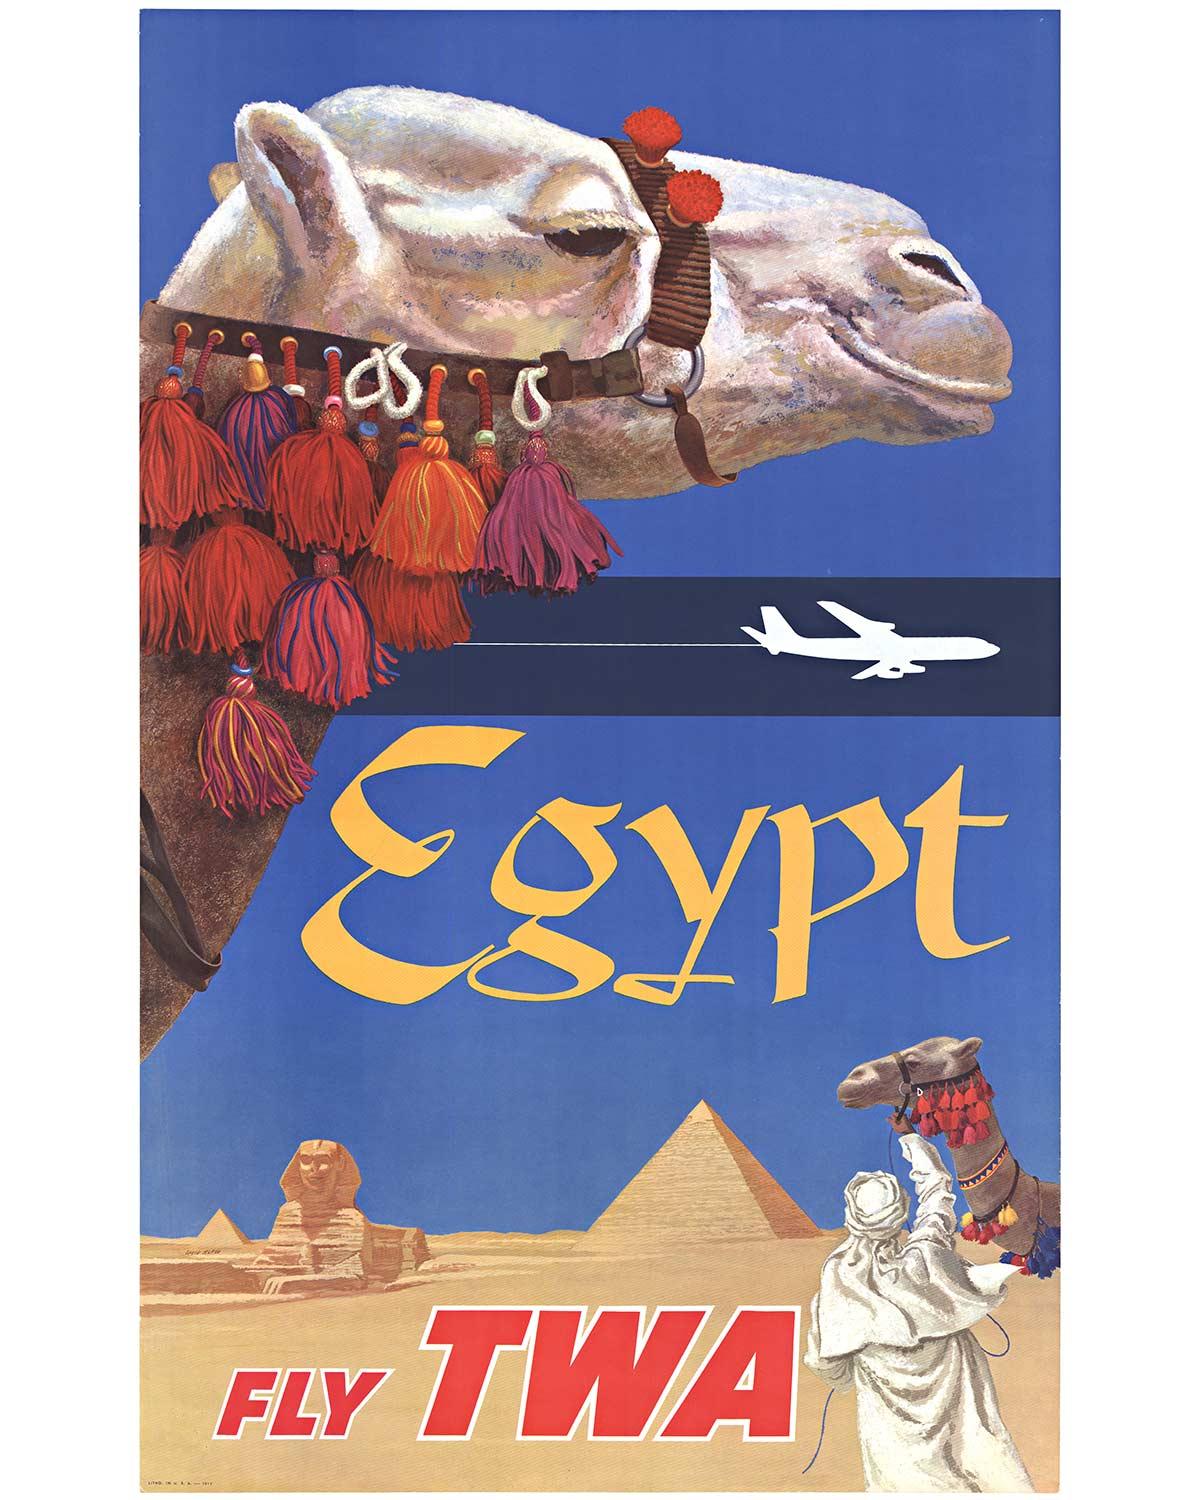 EGYPT FLY TWA.   Original vintage travel poster created by the artist David Klein.   Professional acid-free archival linen backed, very good condition; ready to frame.   Klein always featured some of the most iconic landmarks of a given destination